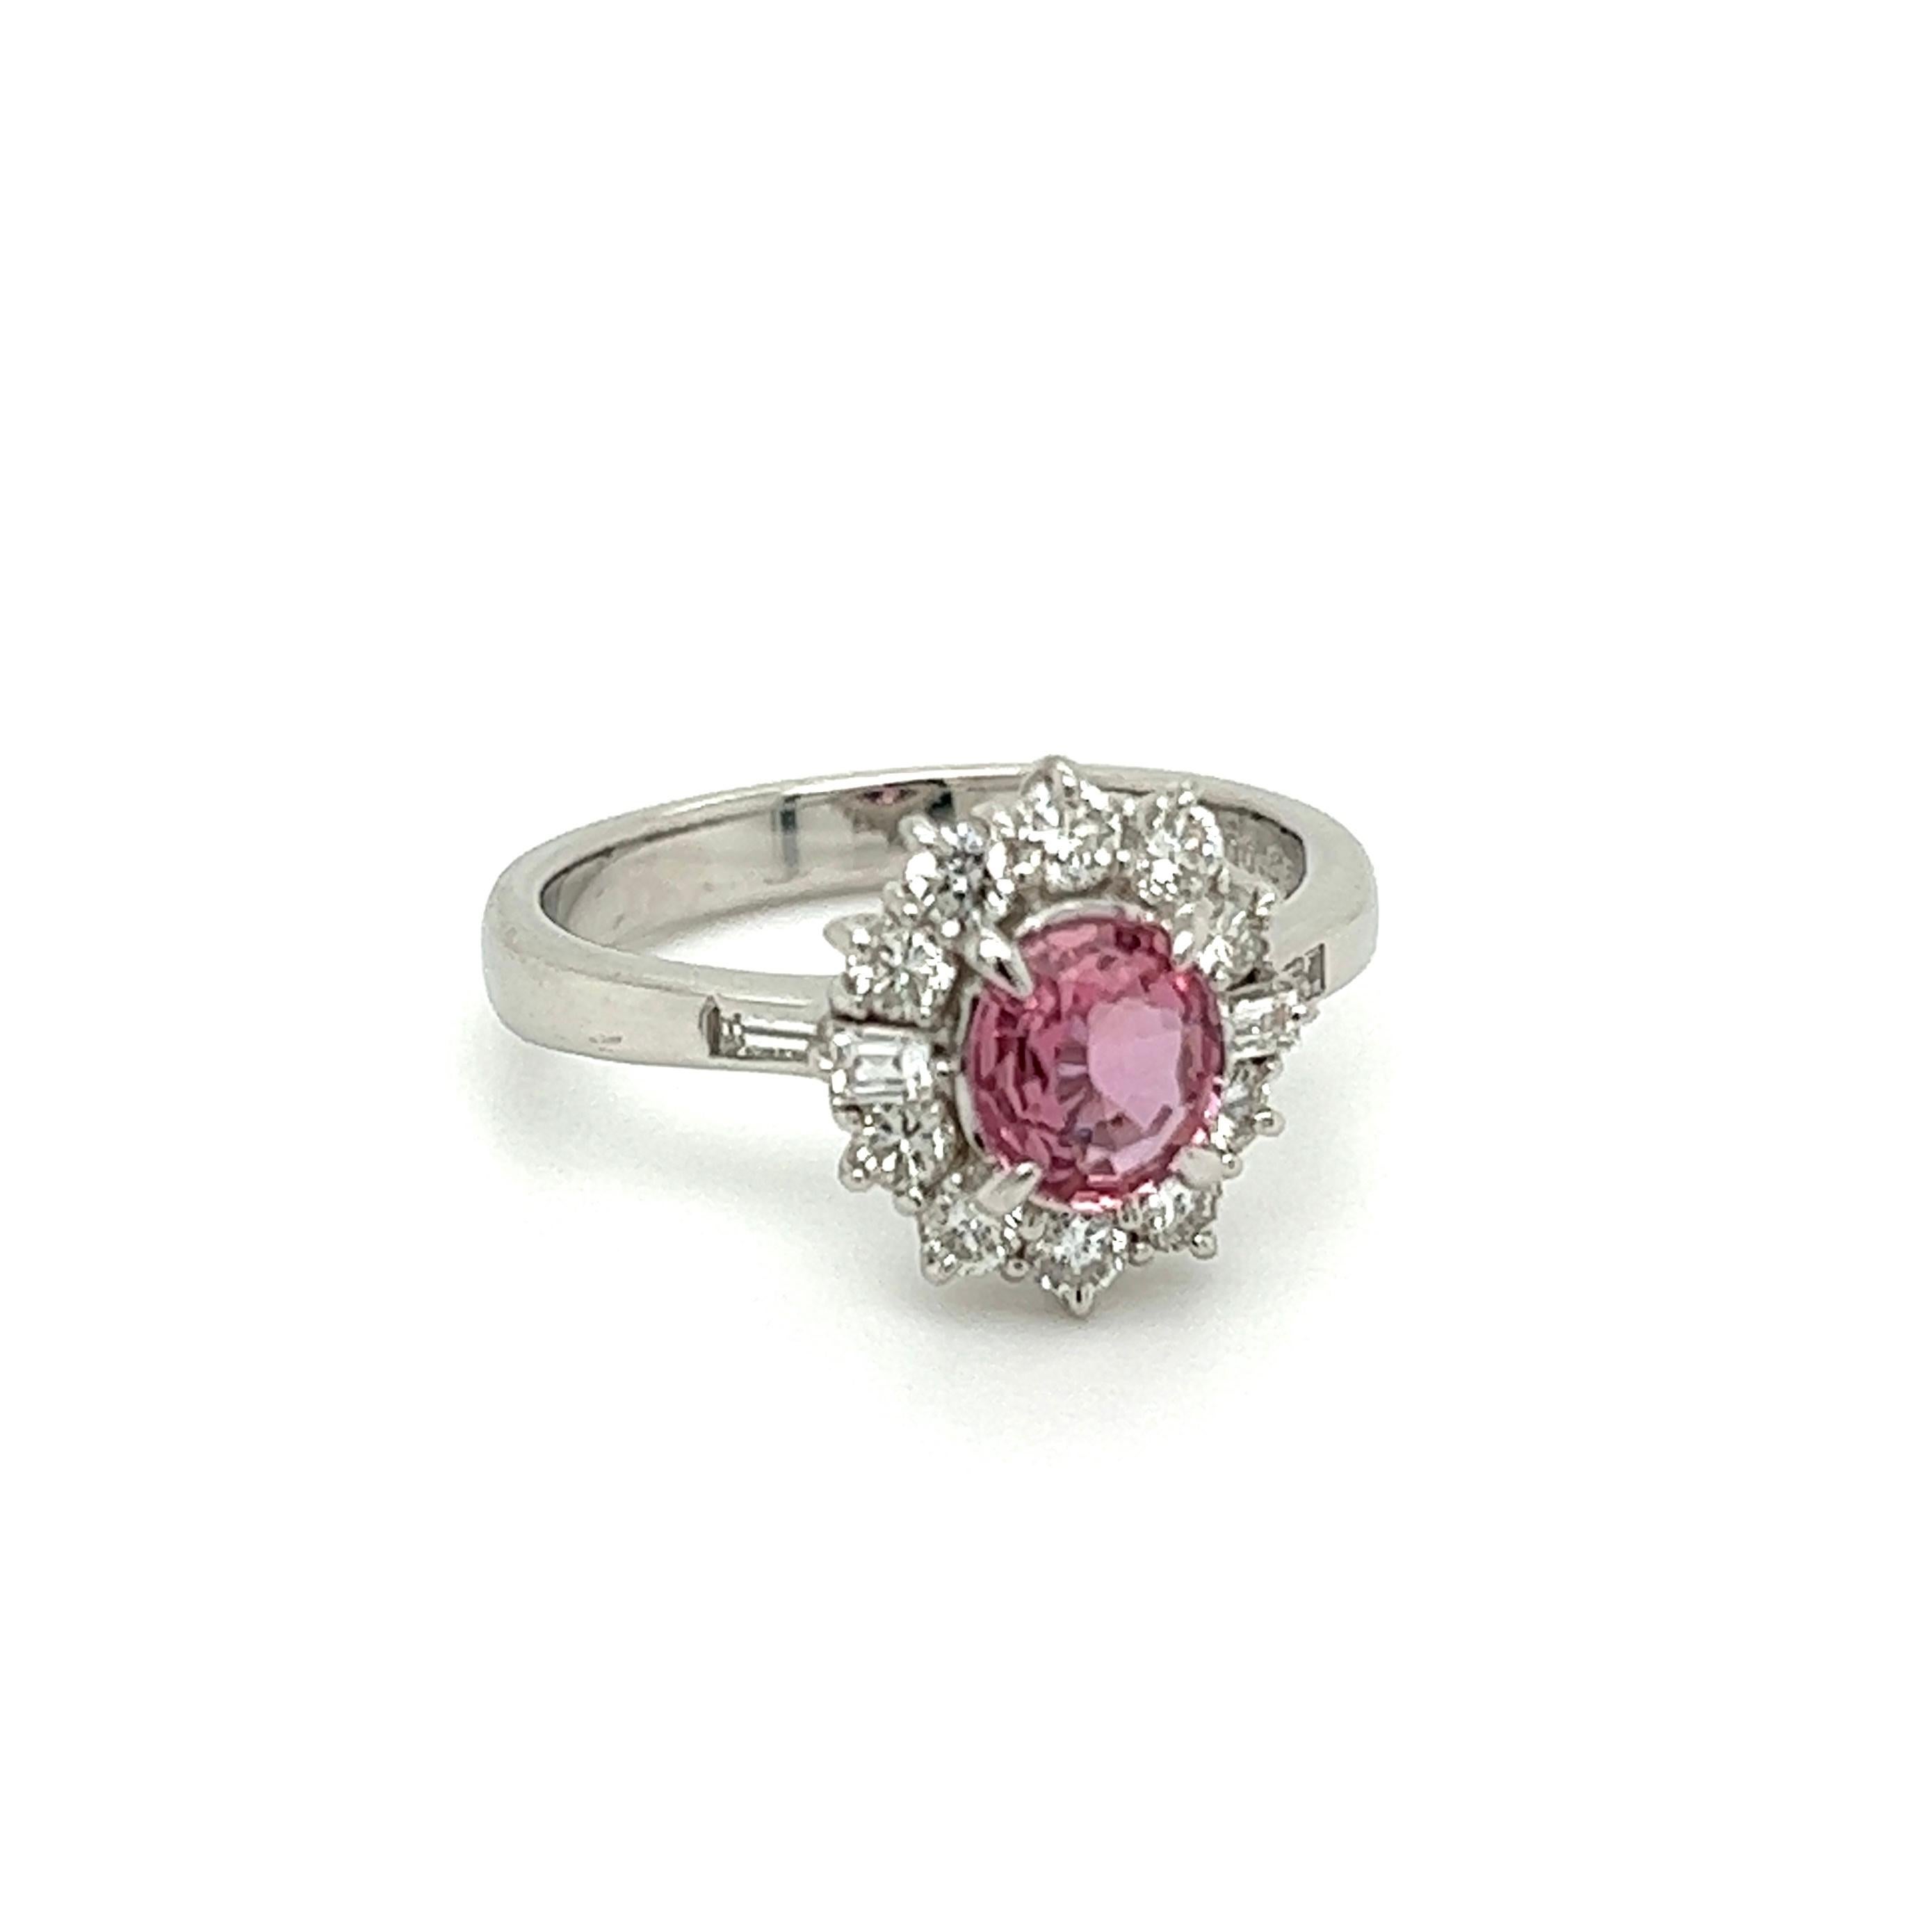 Simply Beautiful Pink Sapphire and Diamond Cocktail Ring. Centering a securely nestled Hand set Pink Sapphire weighing 0.82 Carat. Surrounded by Diamonds weighing approx. 0.55tcw. Hand crafted Platinum mounting. Dimensions: 0.94” l x 0.78” w x 0.46”